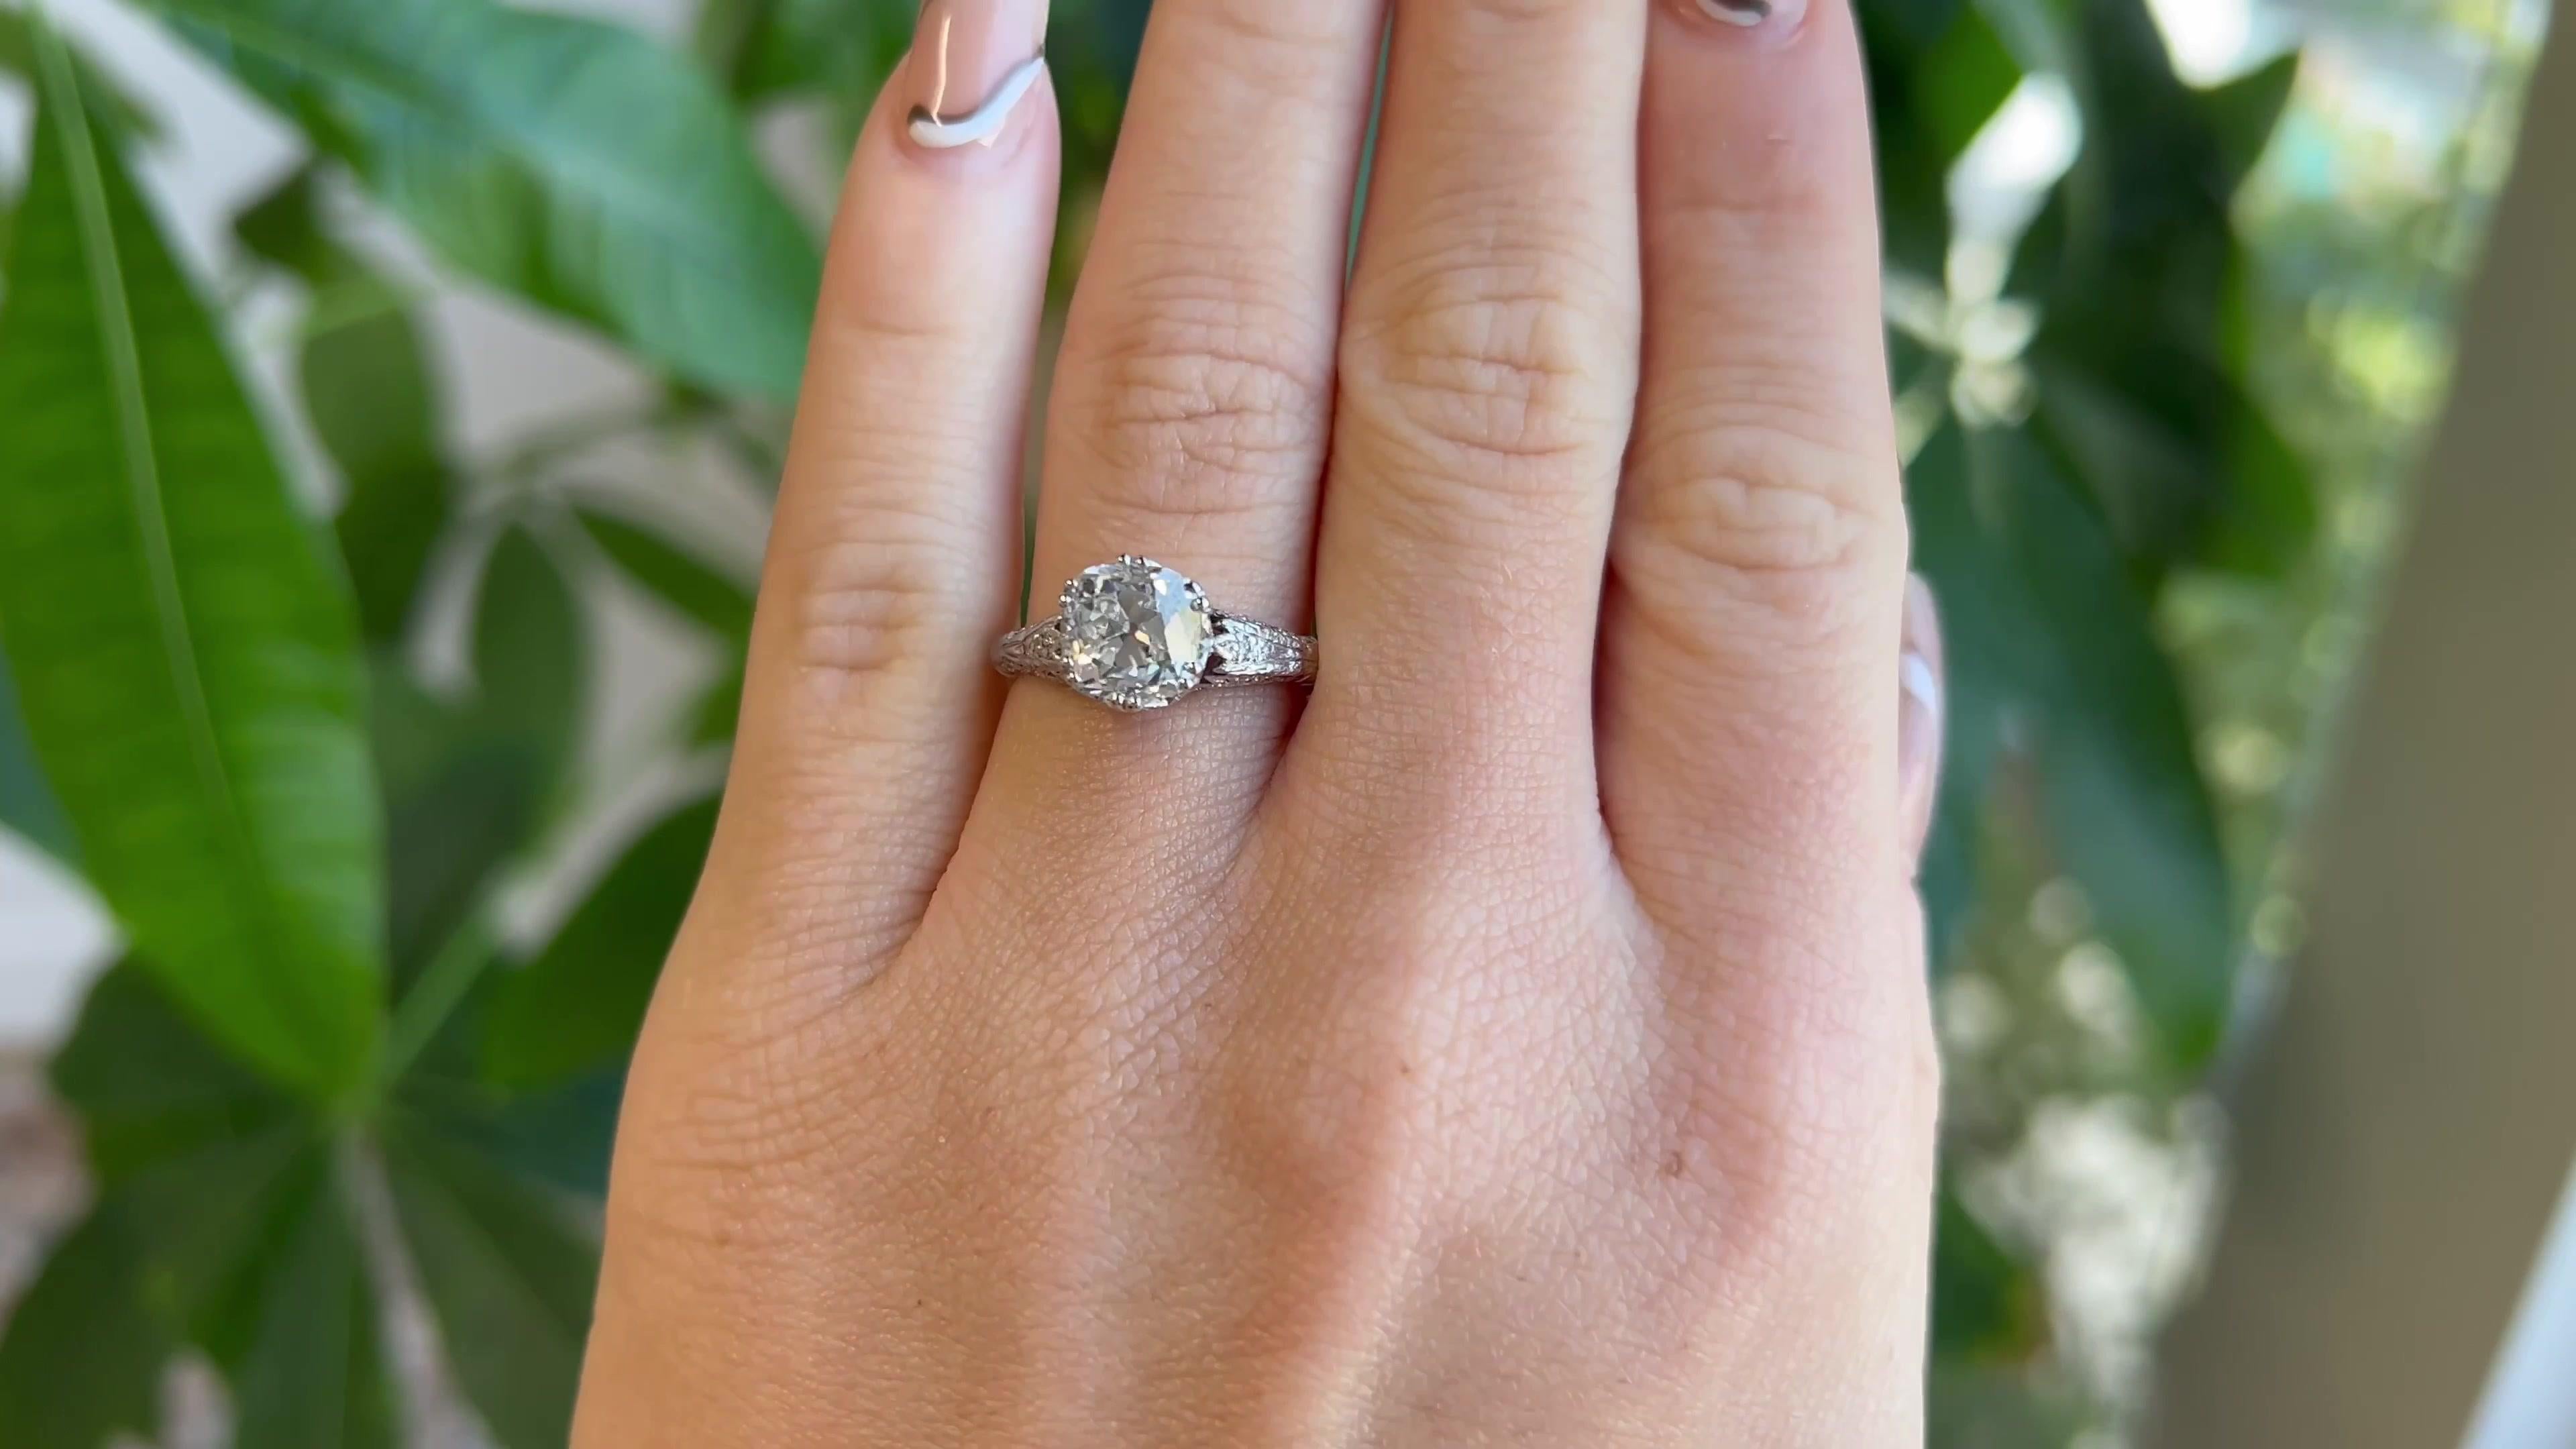 One Mid Century GIA 2.46 Carats Old Mine Cut Diamond Platinum Engagement Ring. Featuring one GIA certified old mine cut diamond of 2.46 carats, accompanied with certificate #5221452403 stating the diamond is J color, SI2 clarity. Accented by 32